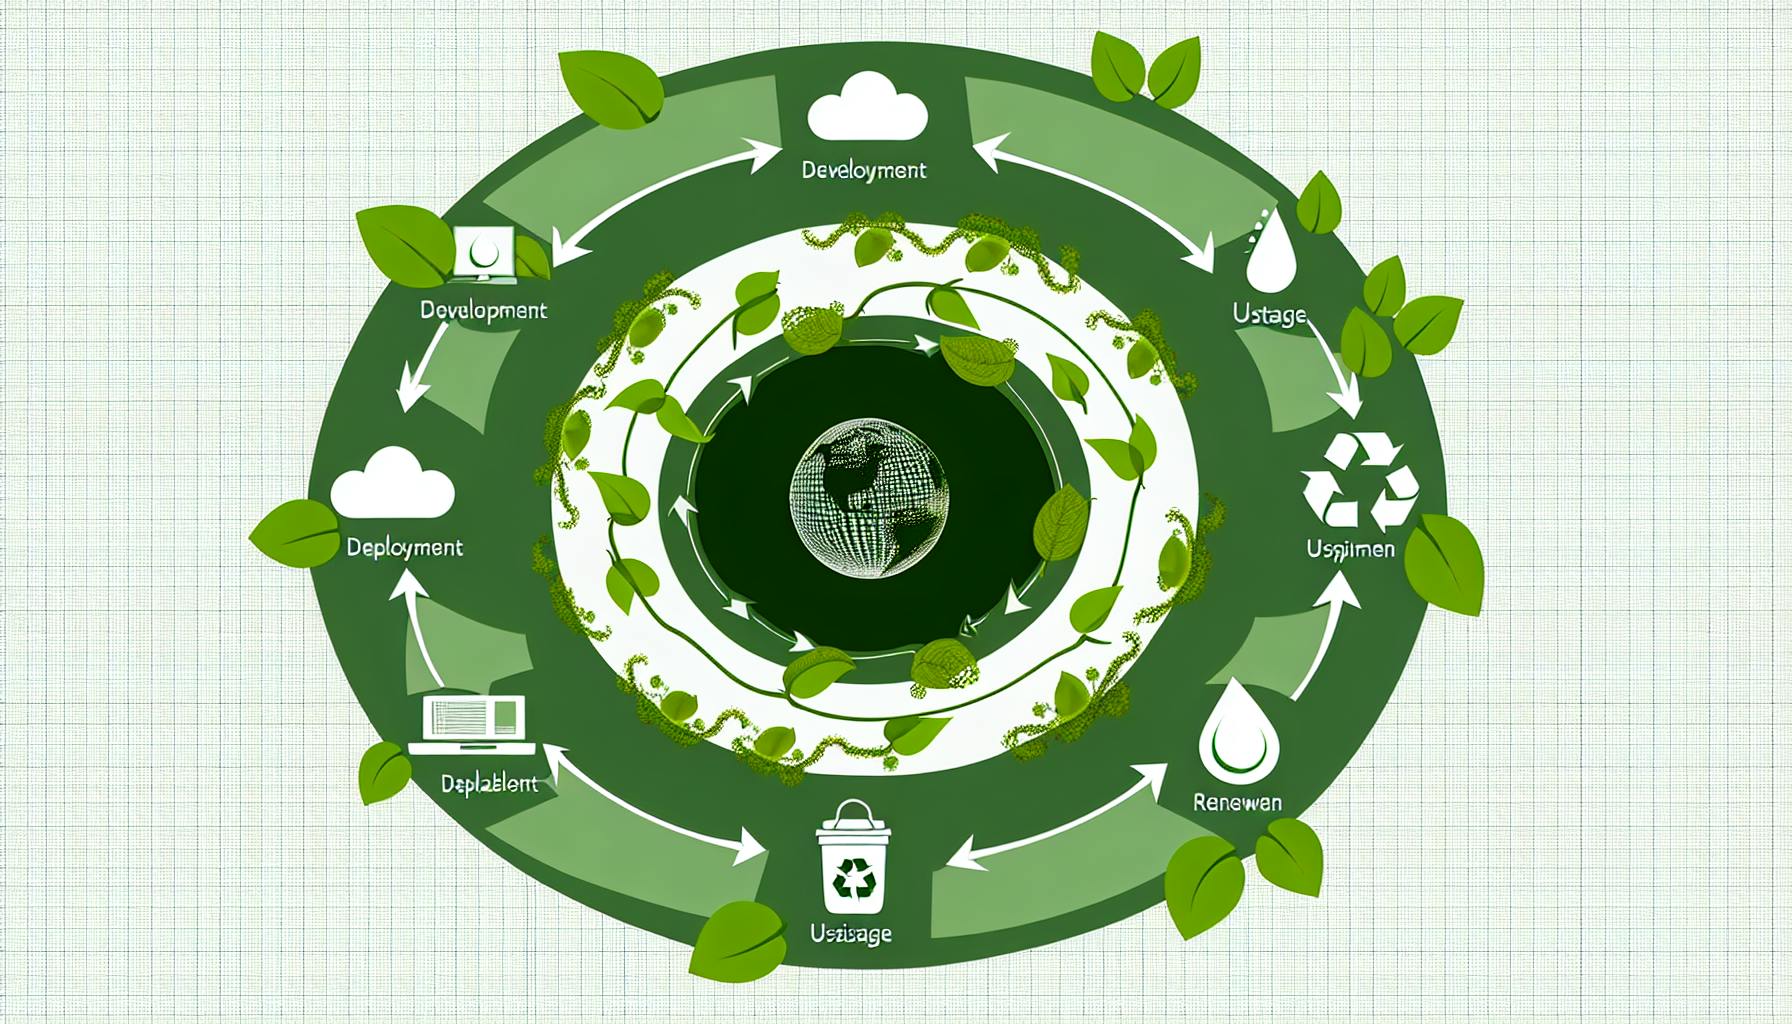 Life of Product Cycle: SaaS Edition for Reducing Carbon Footprint